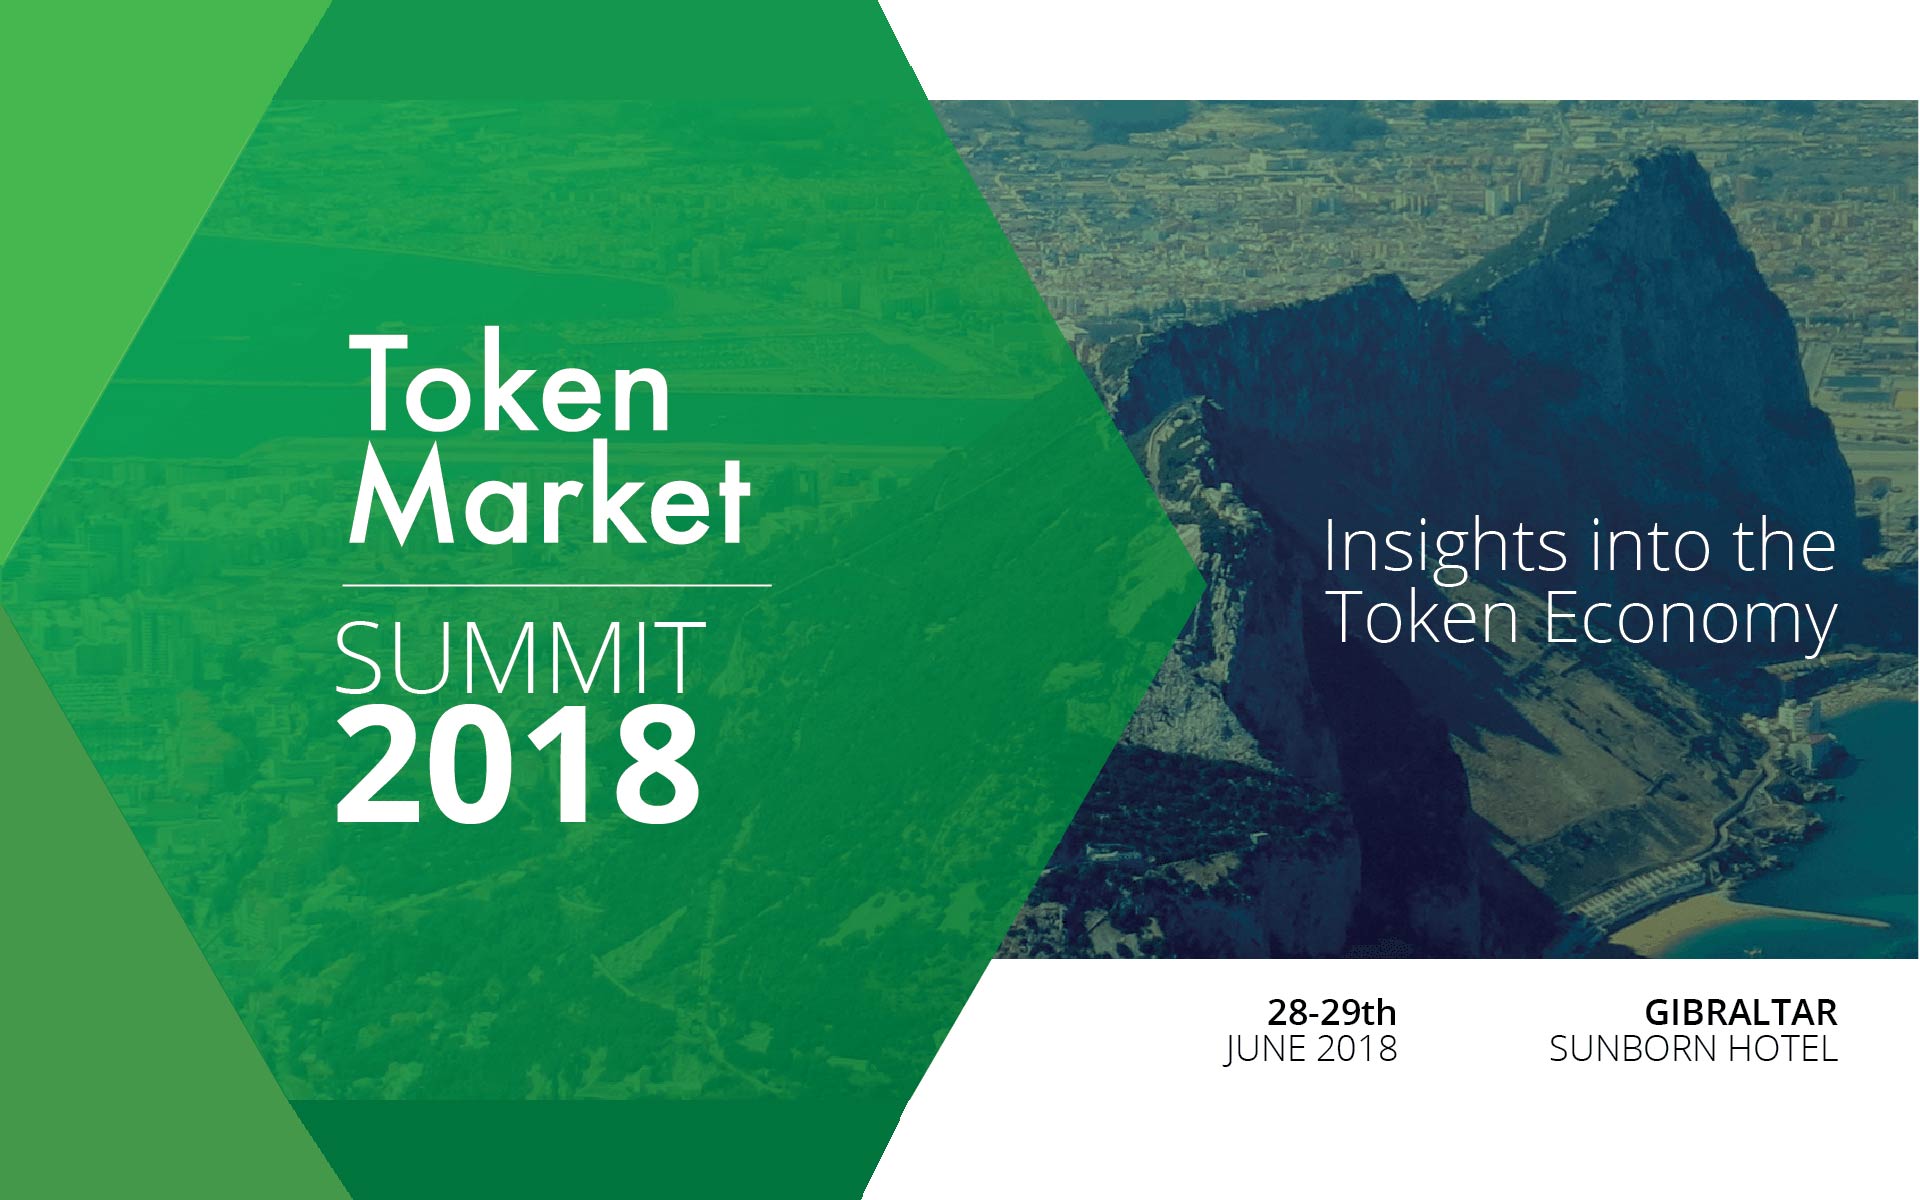 The Government of Gibraltar and Its Most Prominent Law Firms To Feature At TokenMarket 2018 Summit